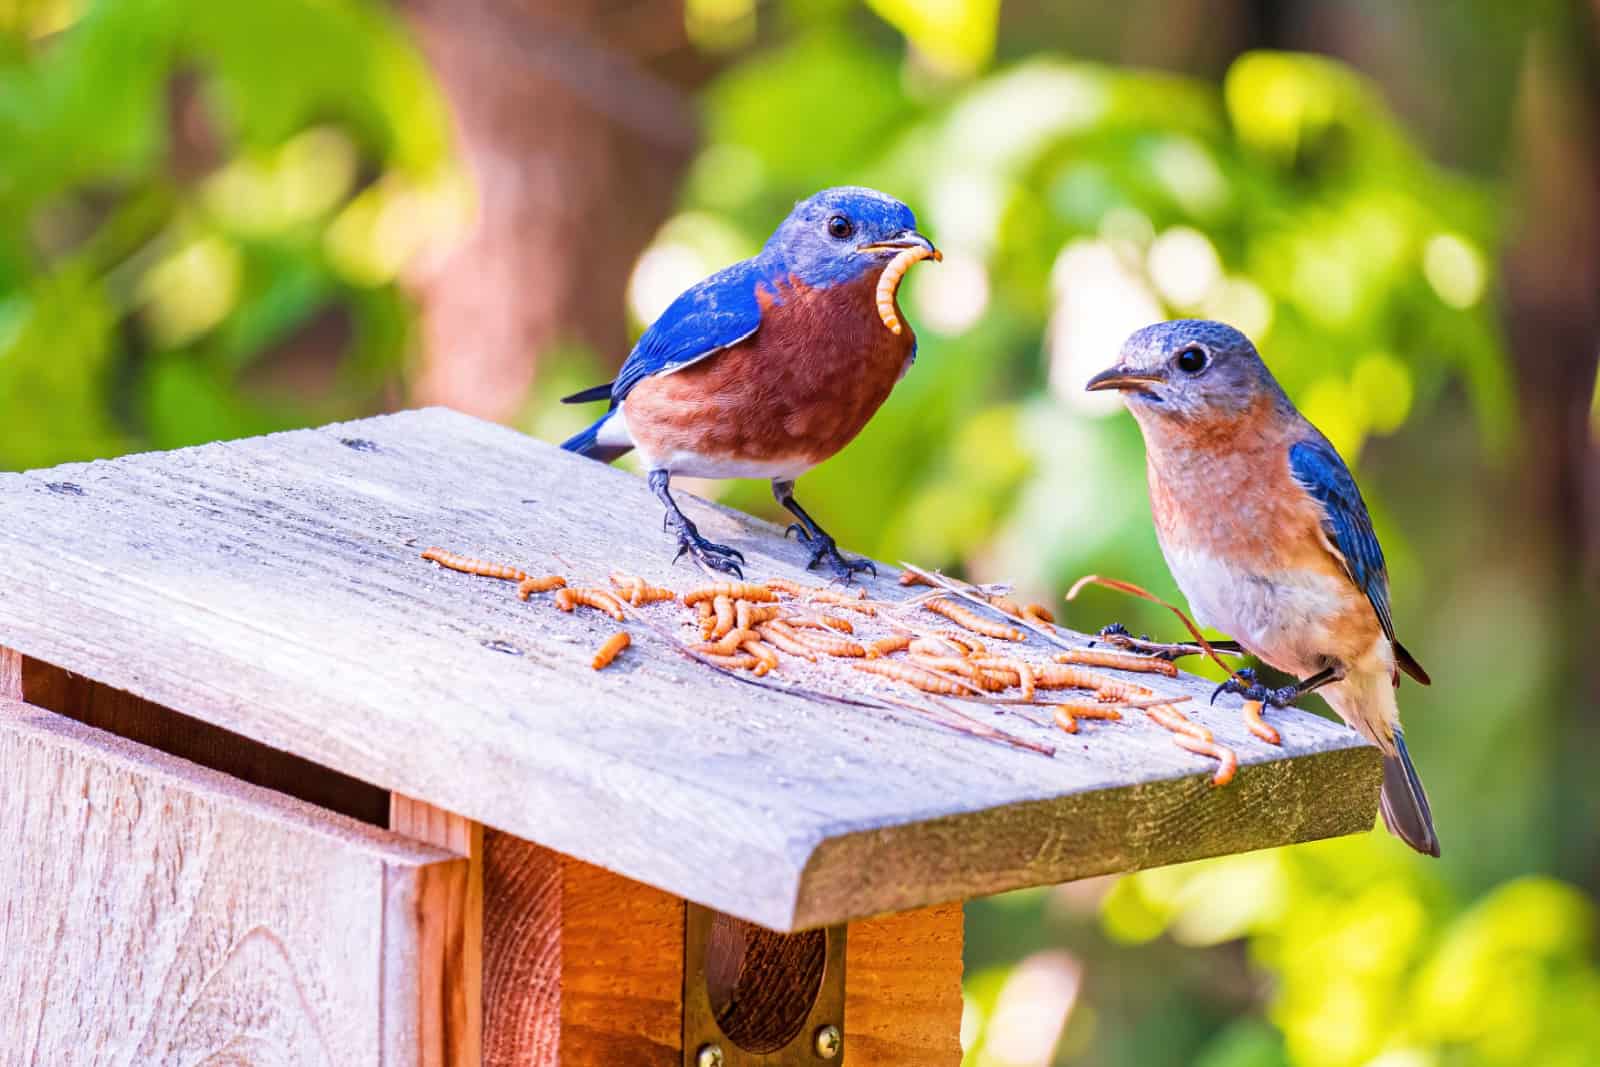 Male and Female Eastern Bluebirds Dine on Mealworms on Their Nest Box.